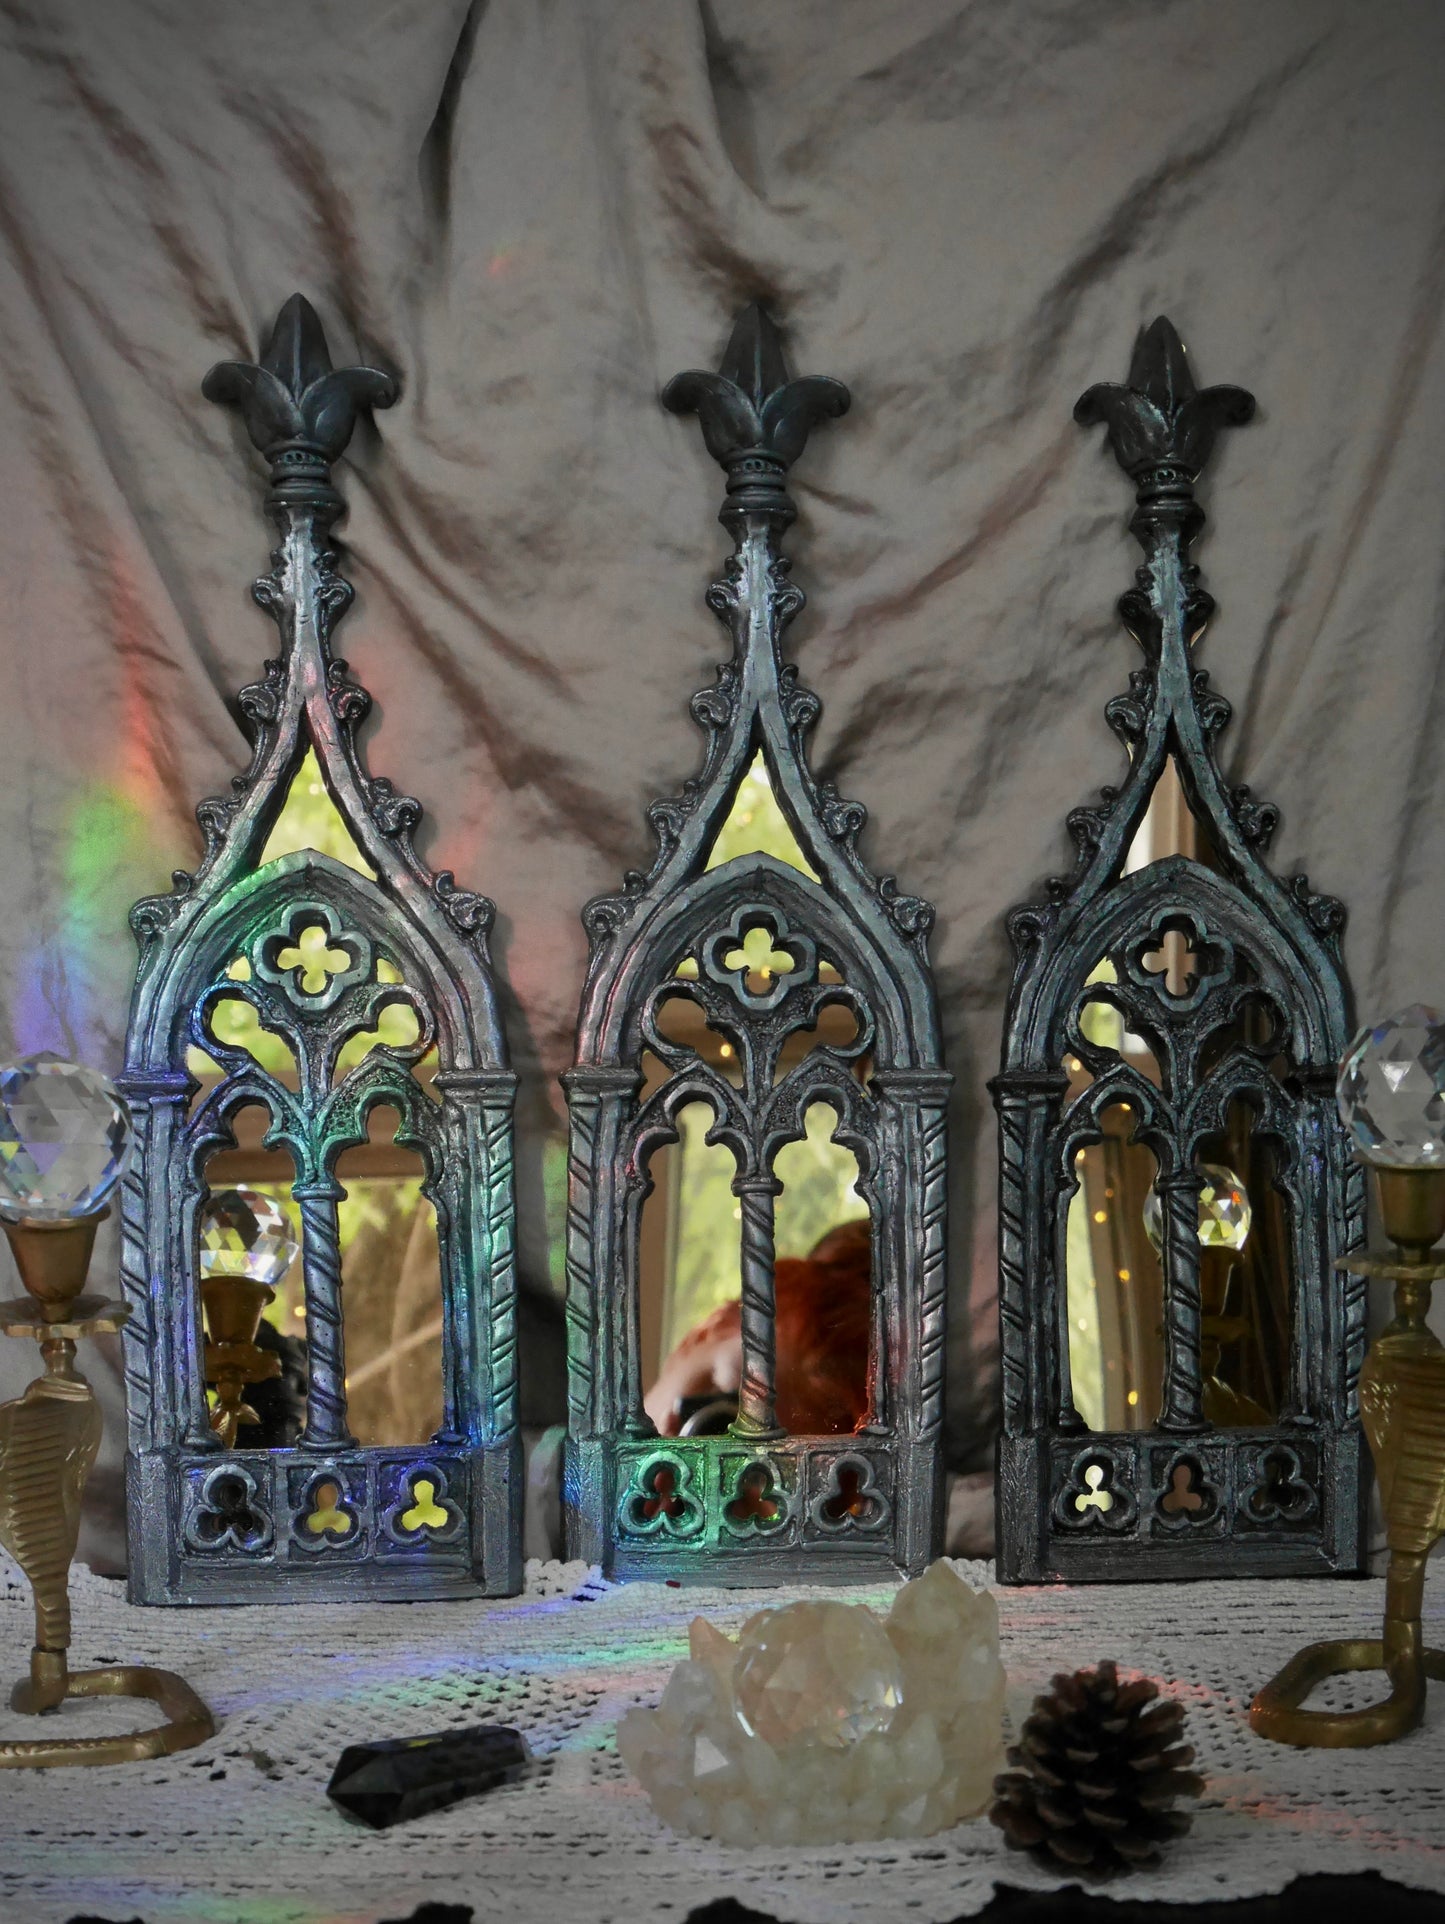 Gothic Spires - Pewter and Gold Acrylic Mirror